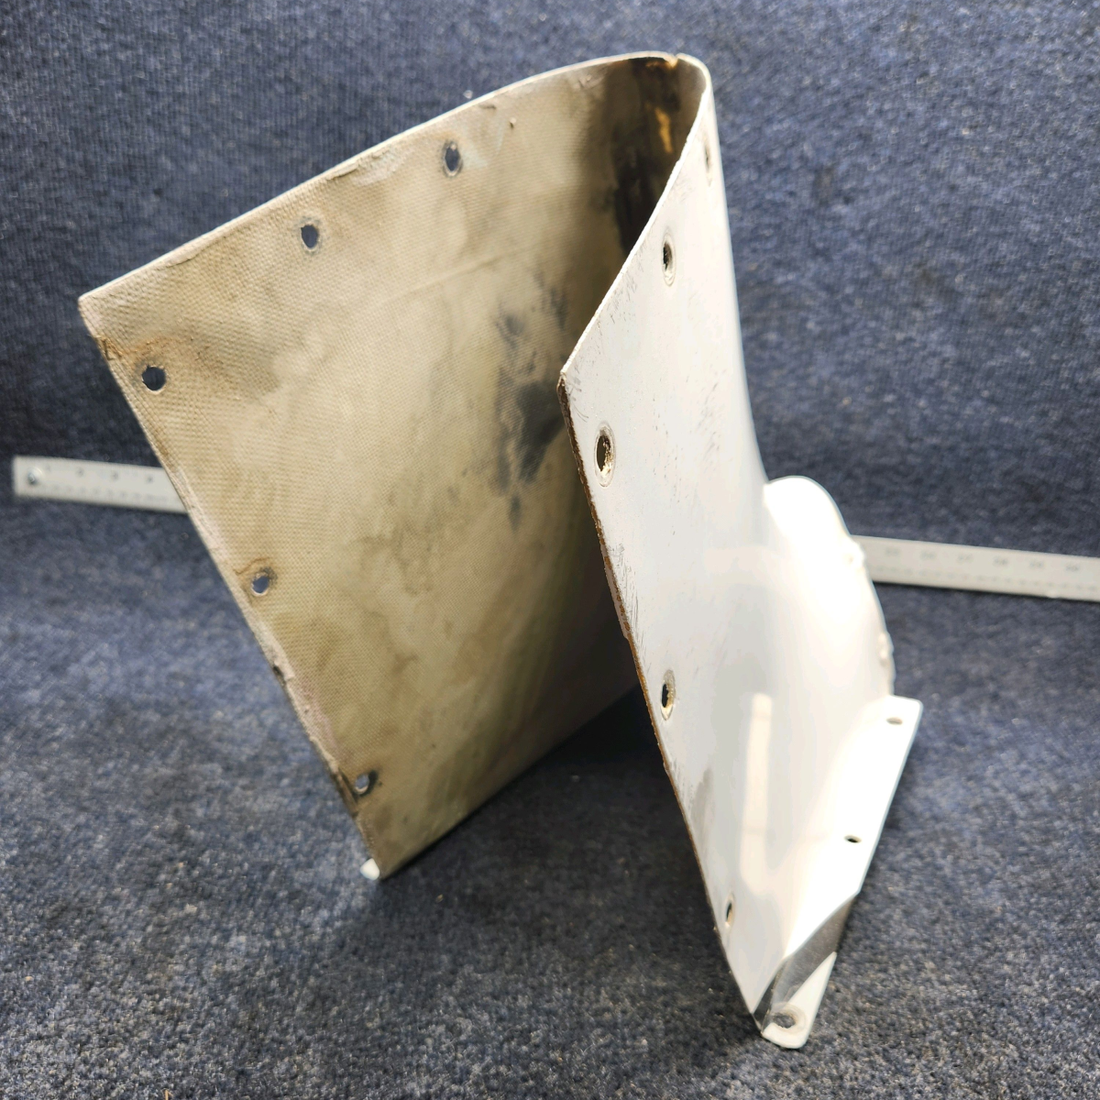 Used aircraft parts for sale, 78913-003 Piper PA32RT-300 AFT DORSAL FIN SADDLE